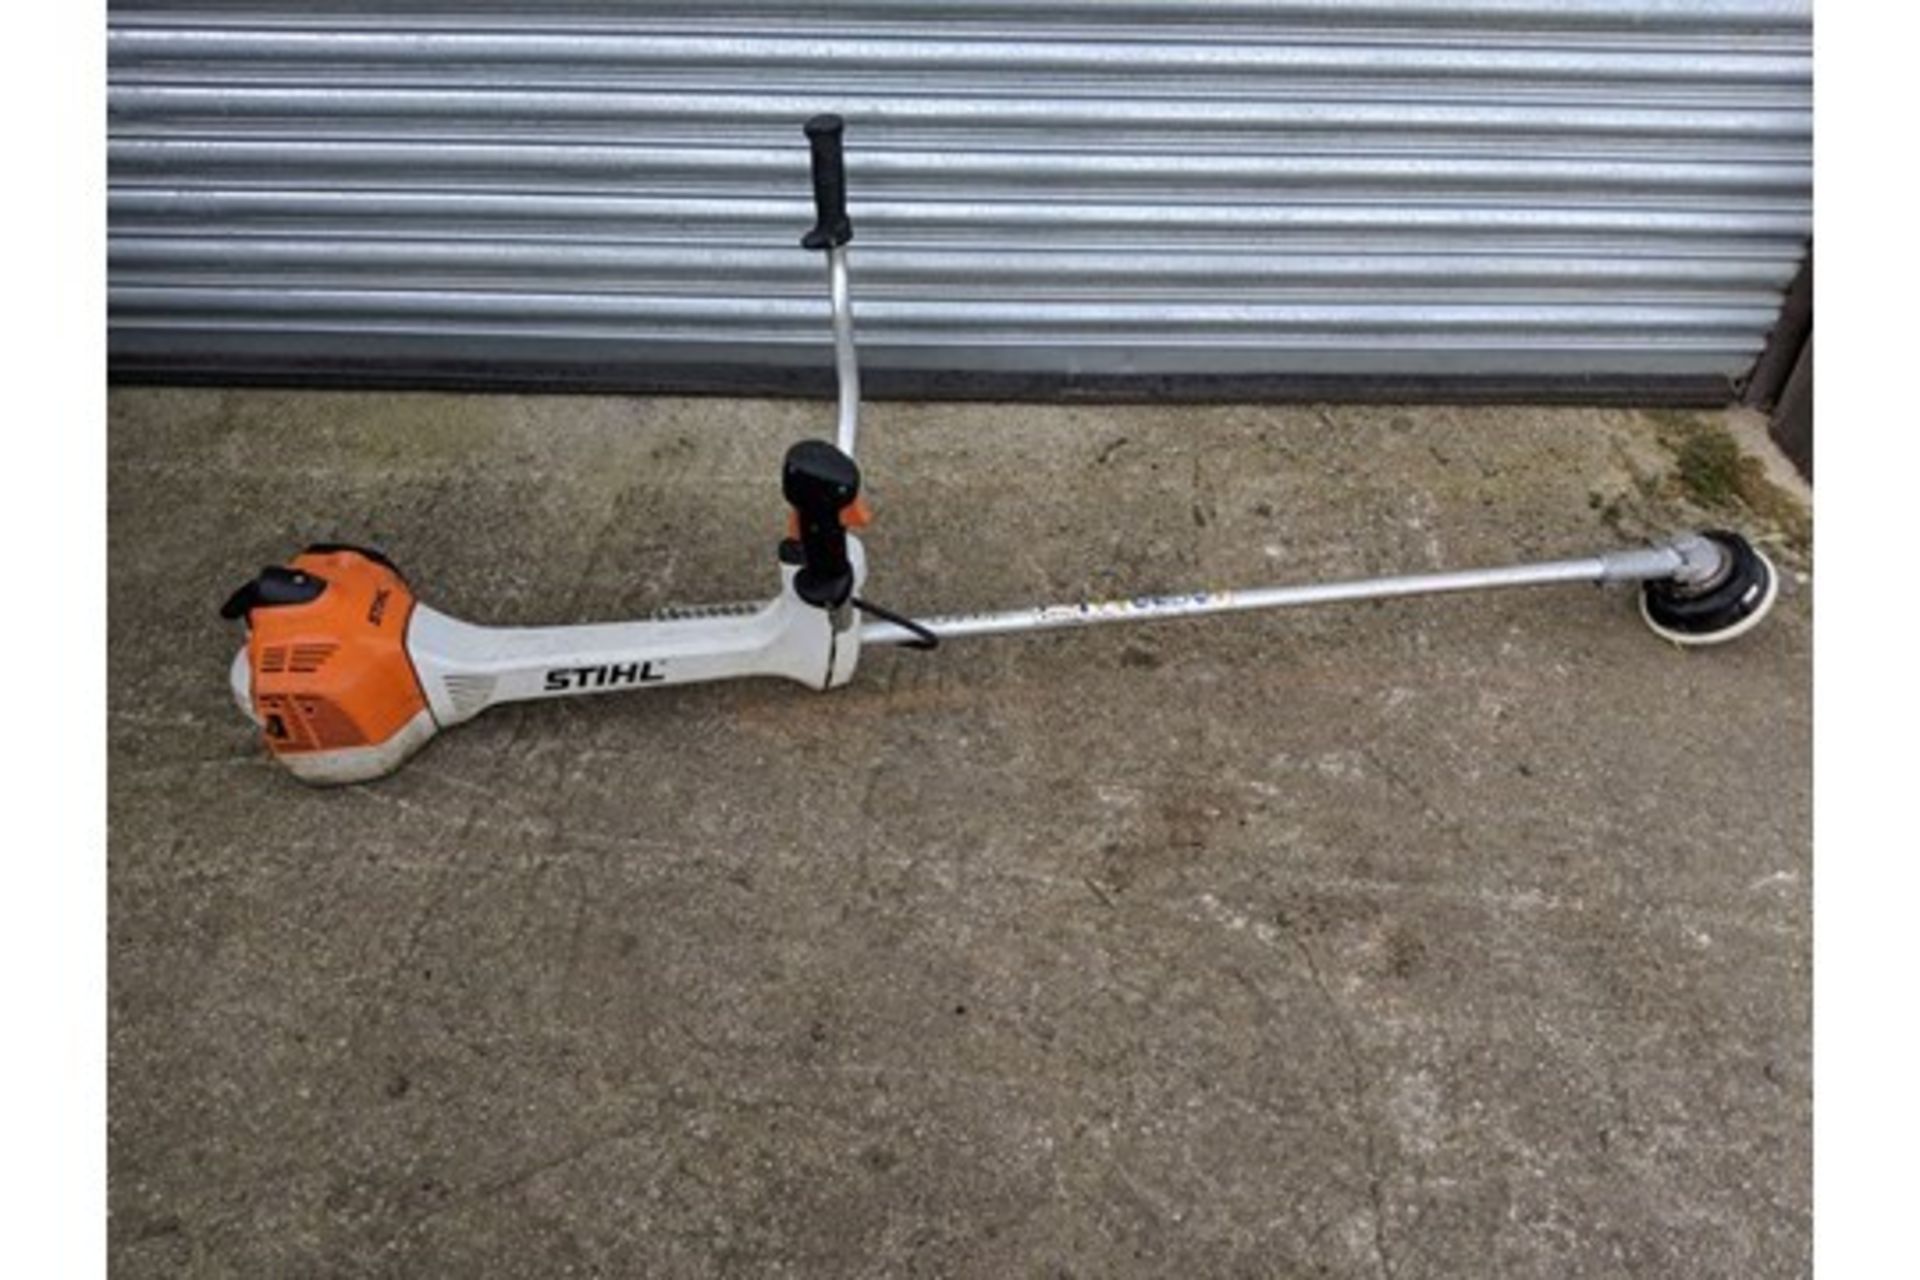 STIHL FS 460 C Professional Strimmer Clearing Saw - Image 2 of 3